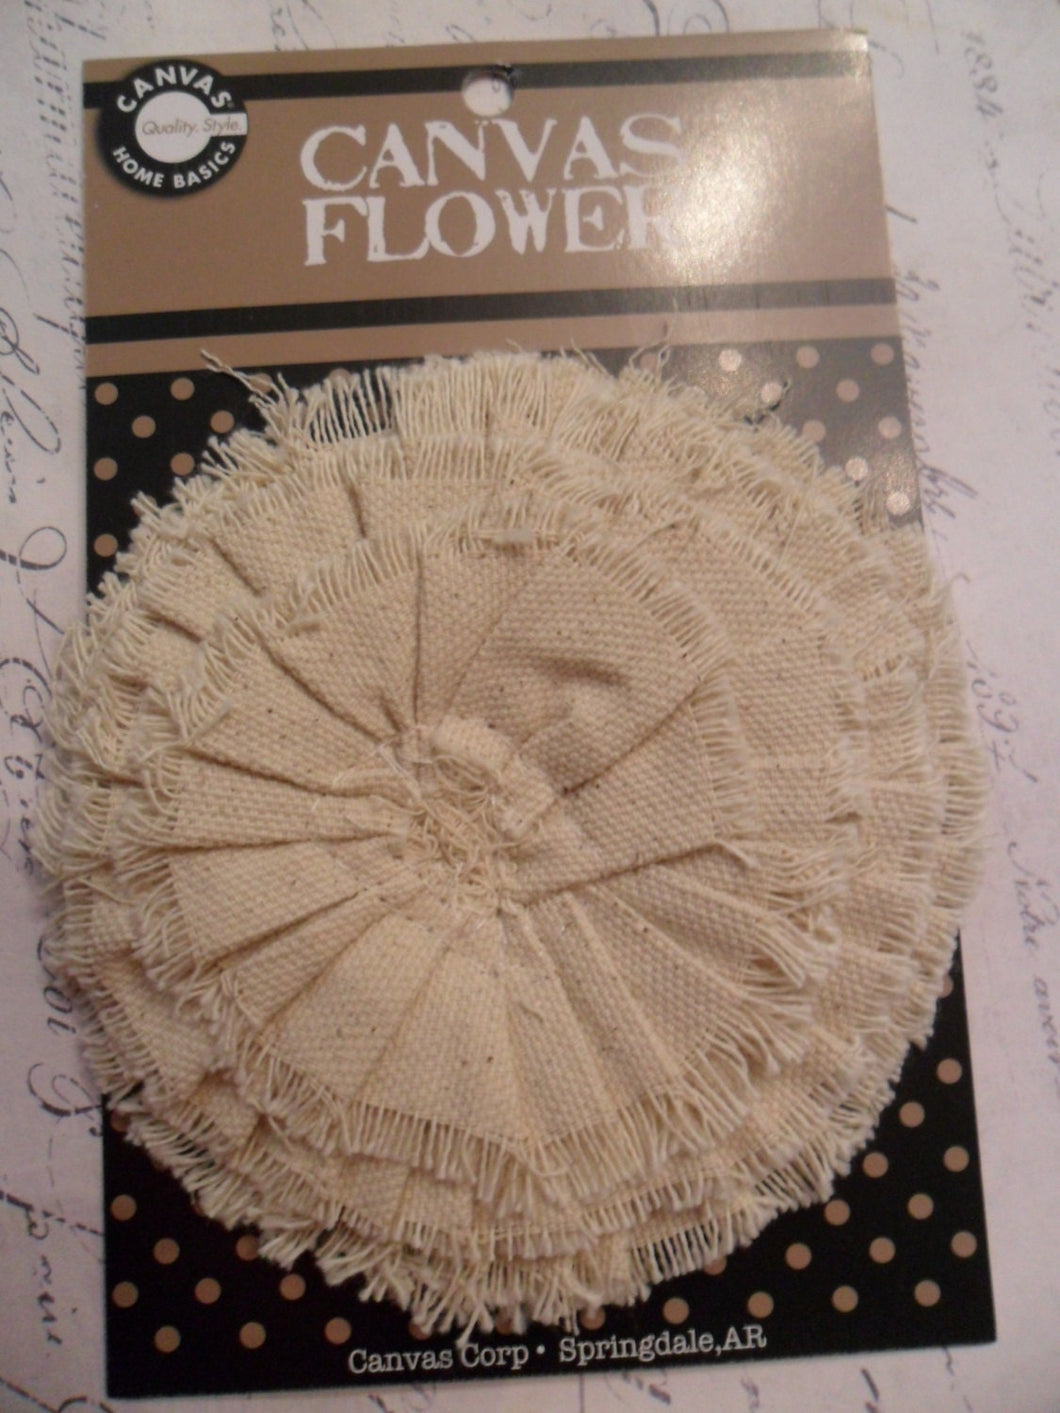 Canvas Corp Flower Rosette 4 inches in diameter